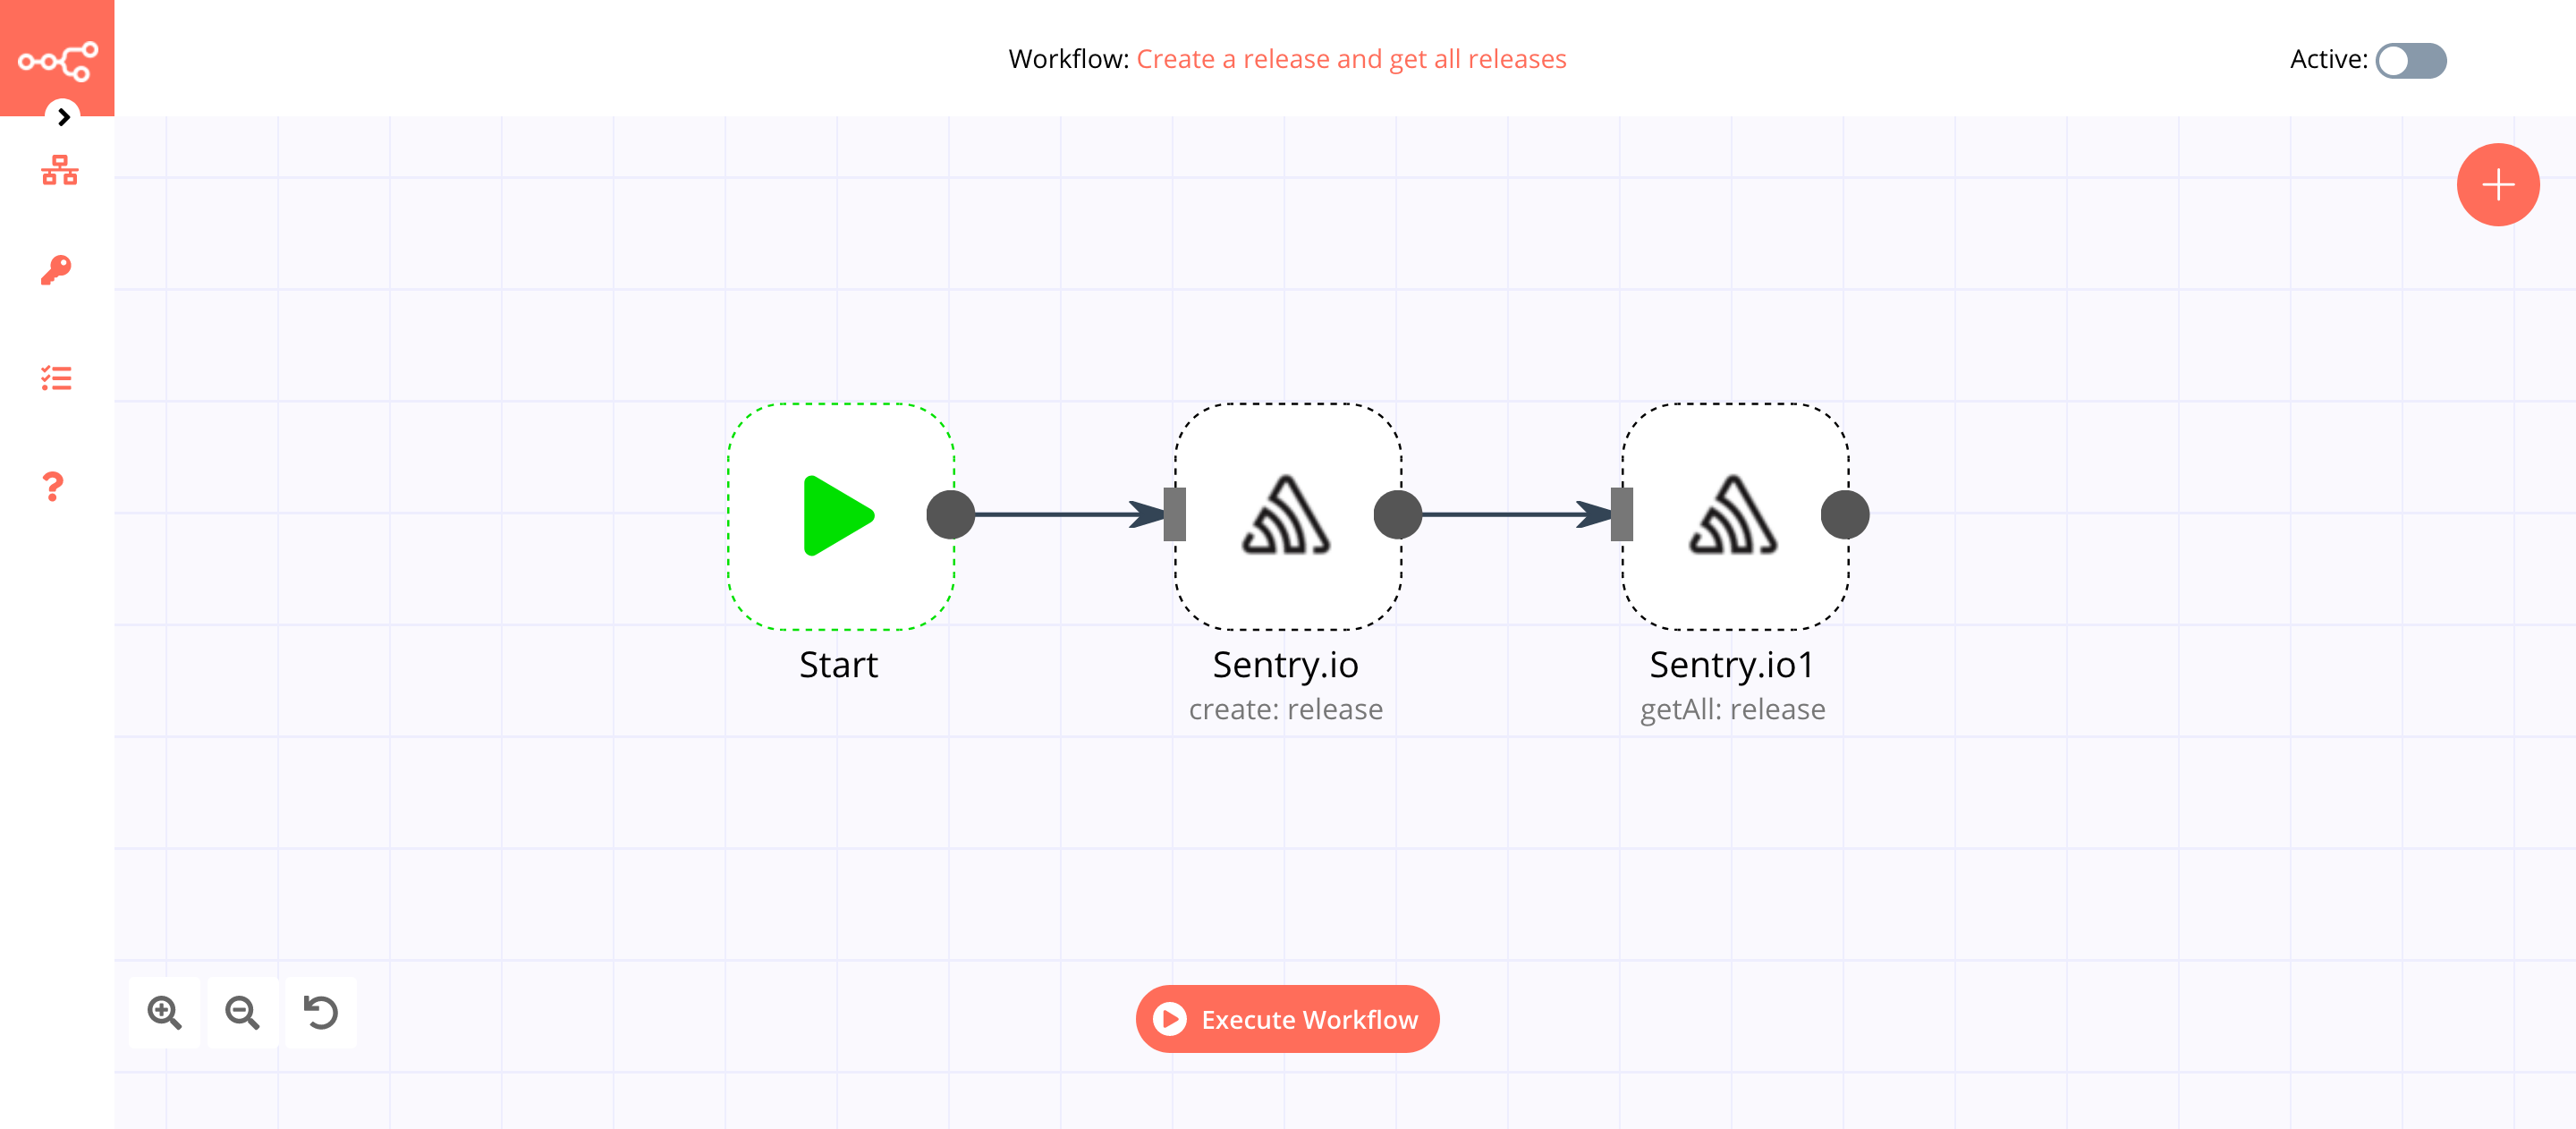 A workflow with the Sentry.io node